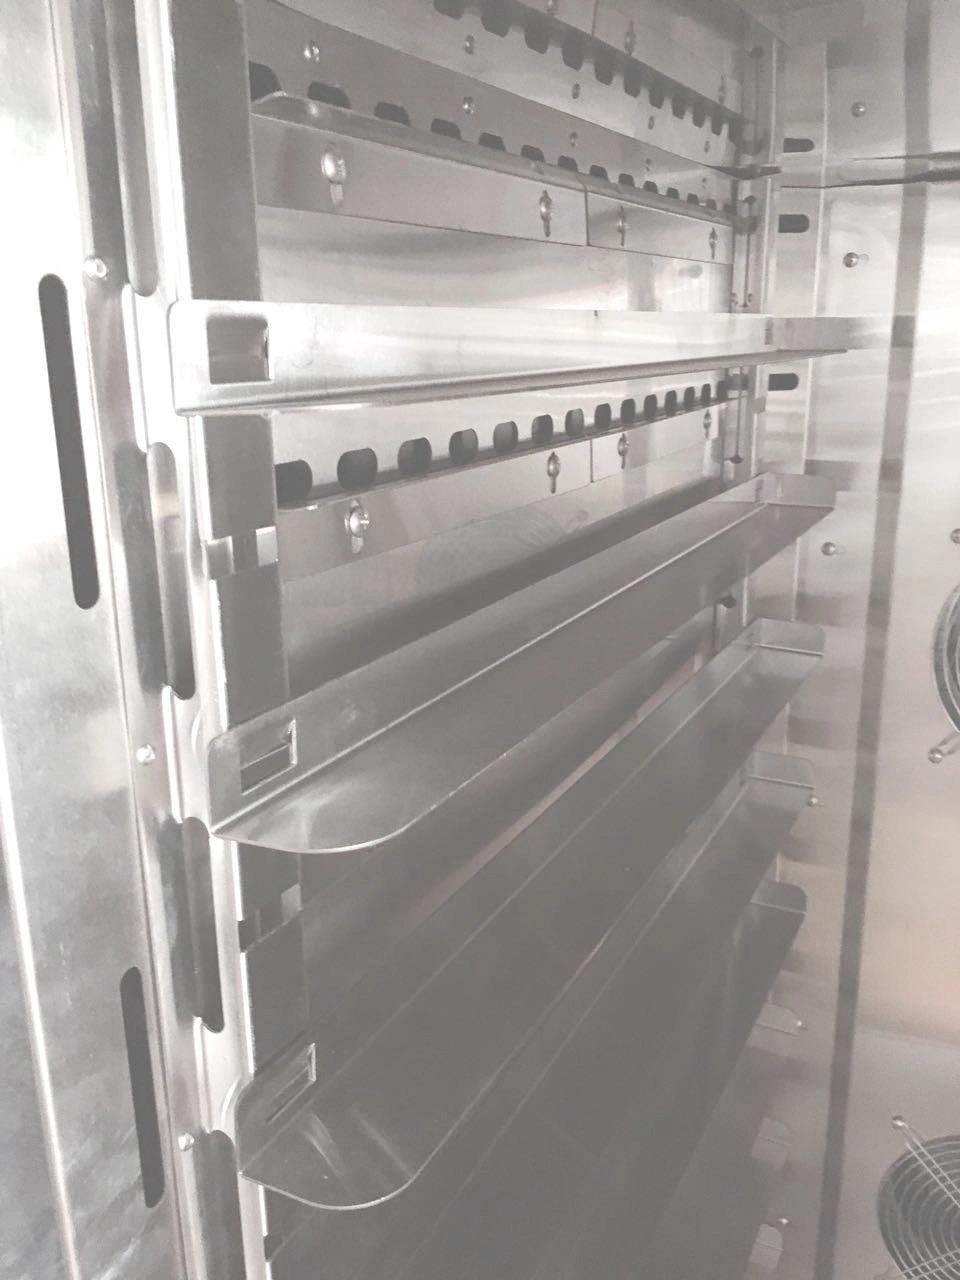 Wholesale Kitchen Bakery Equipment 5 Trays Gas Pizza Bread Cake Hot Air Convection Oven with Steam